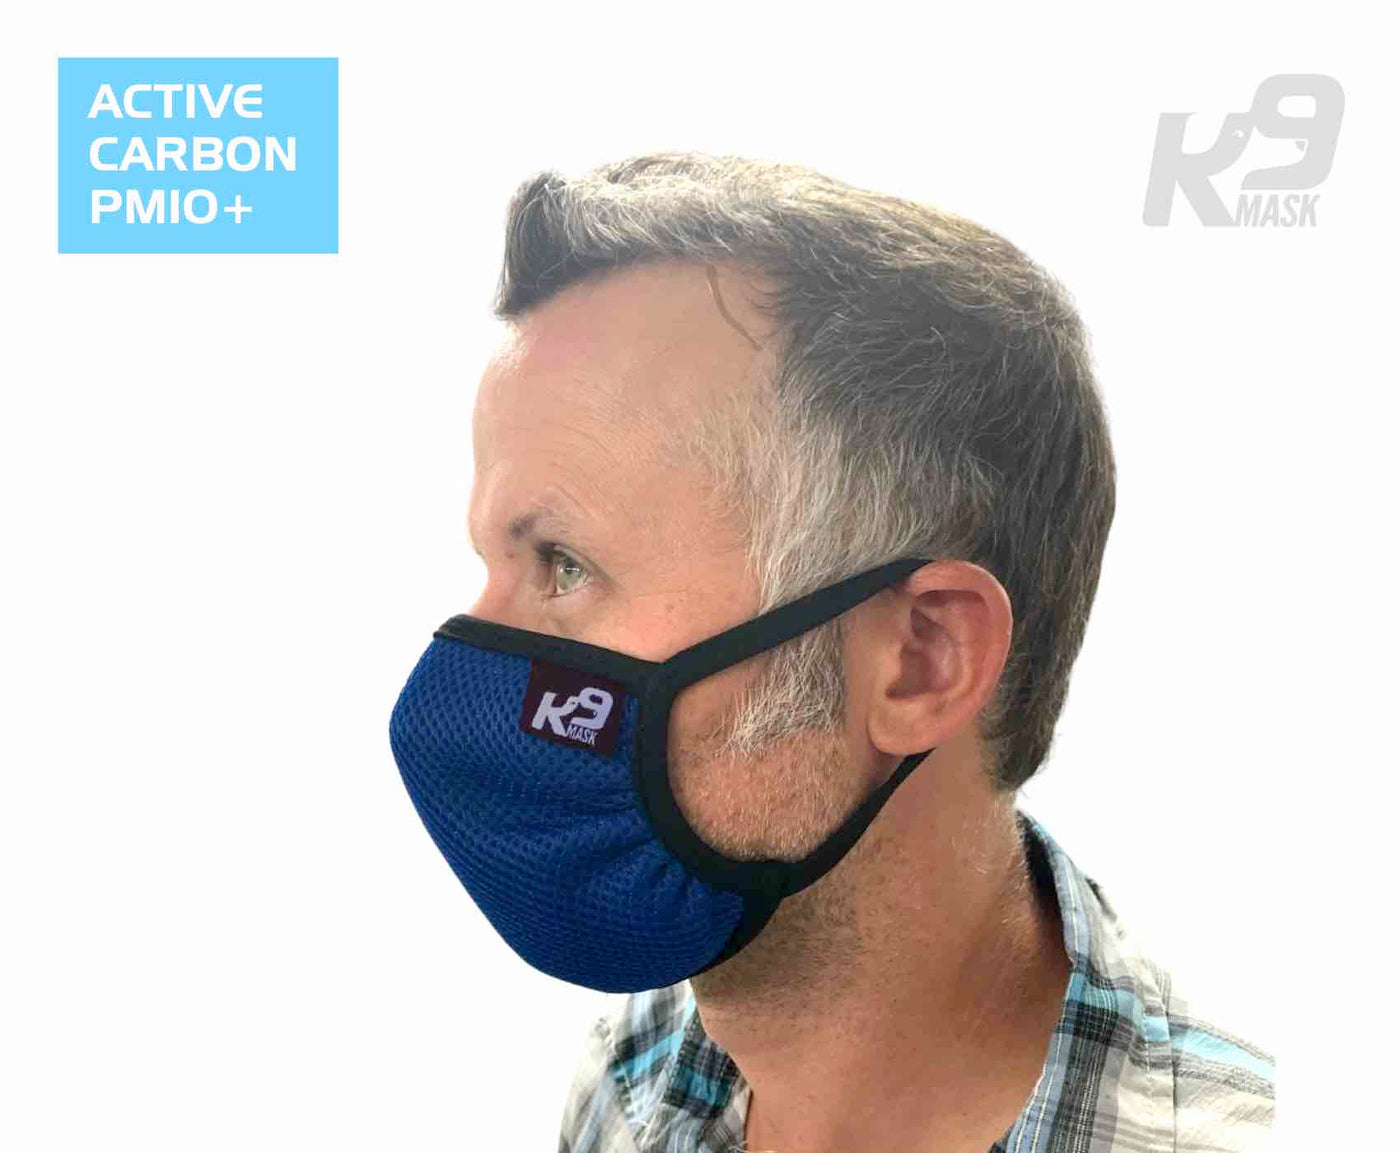 K9 Mask® for Humans man clean breathe air filters